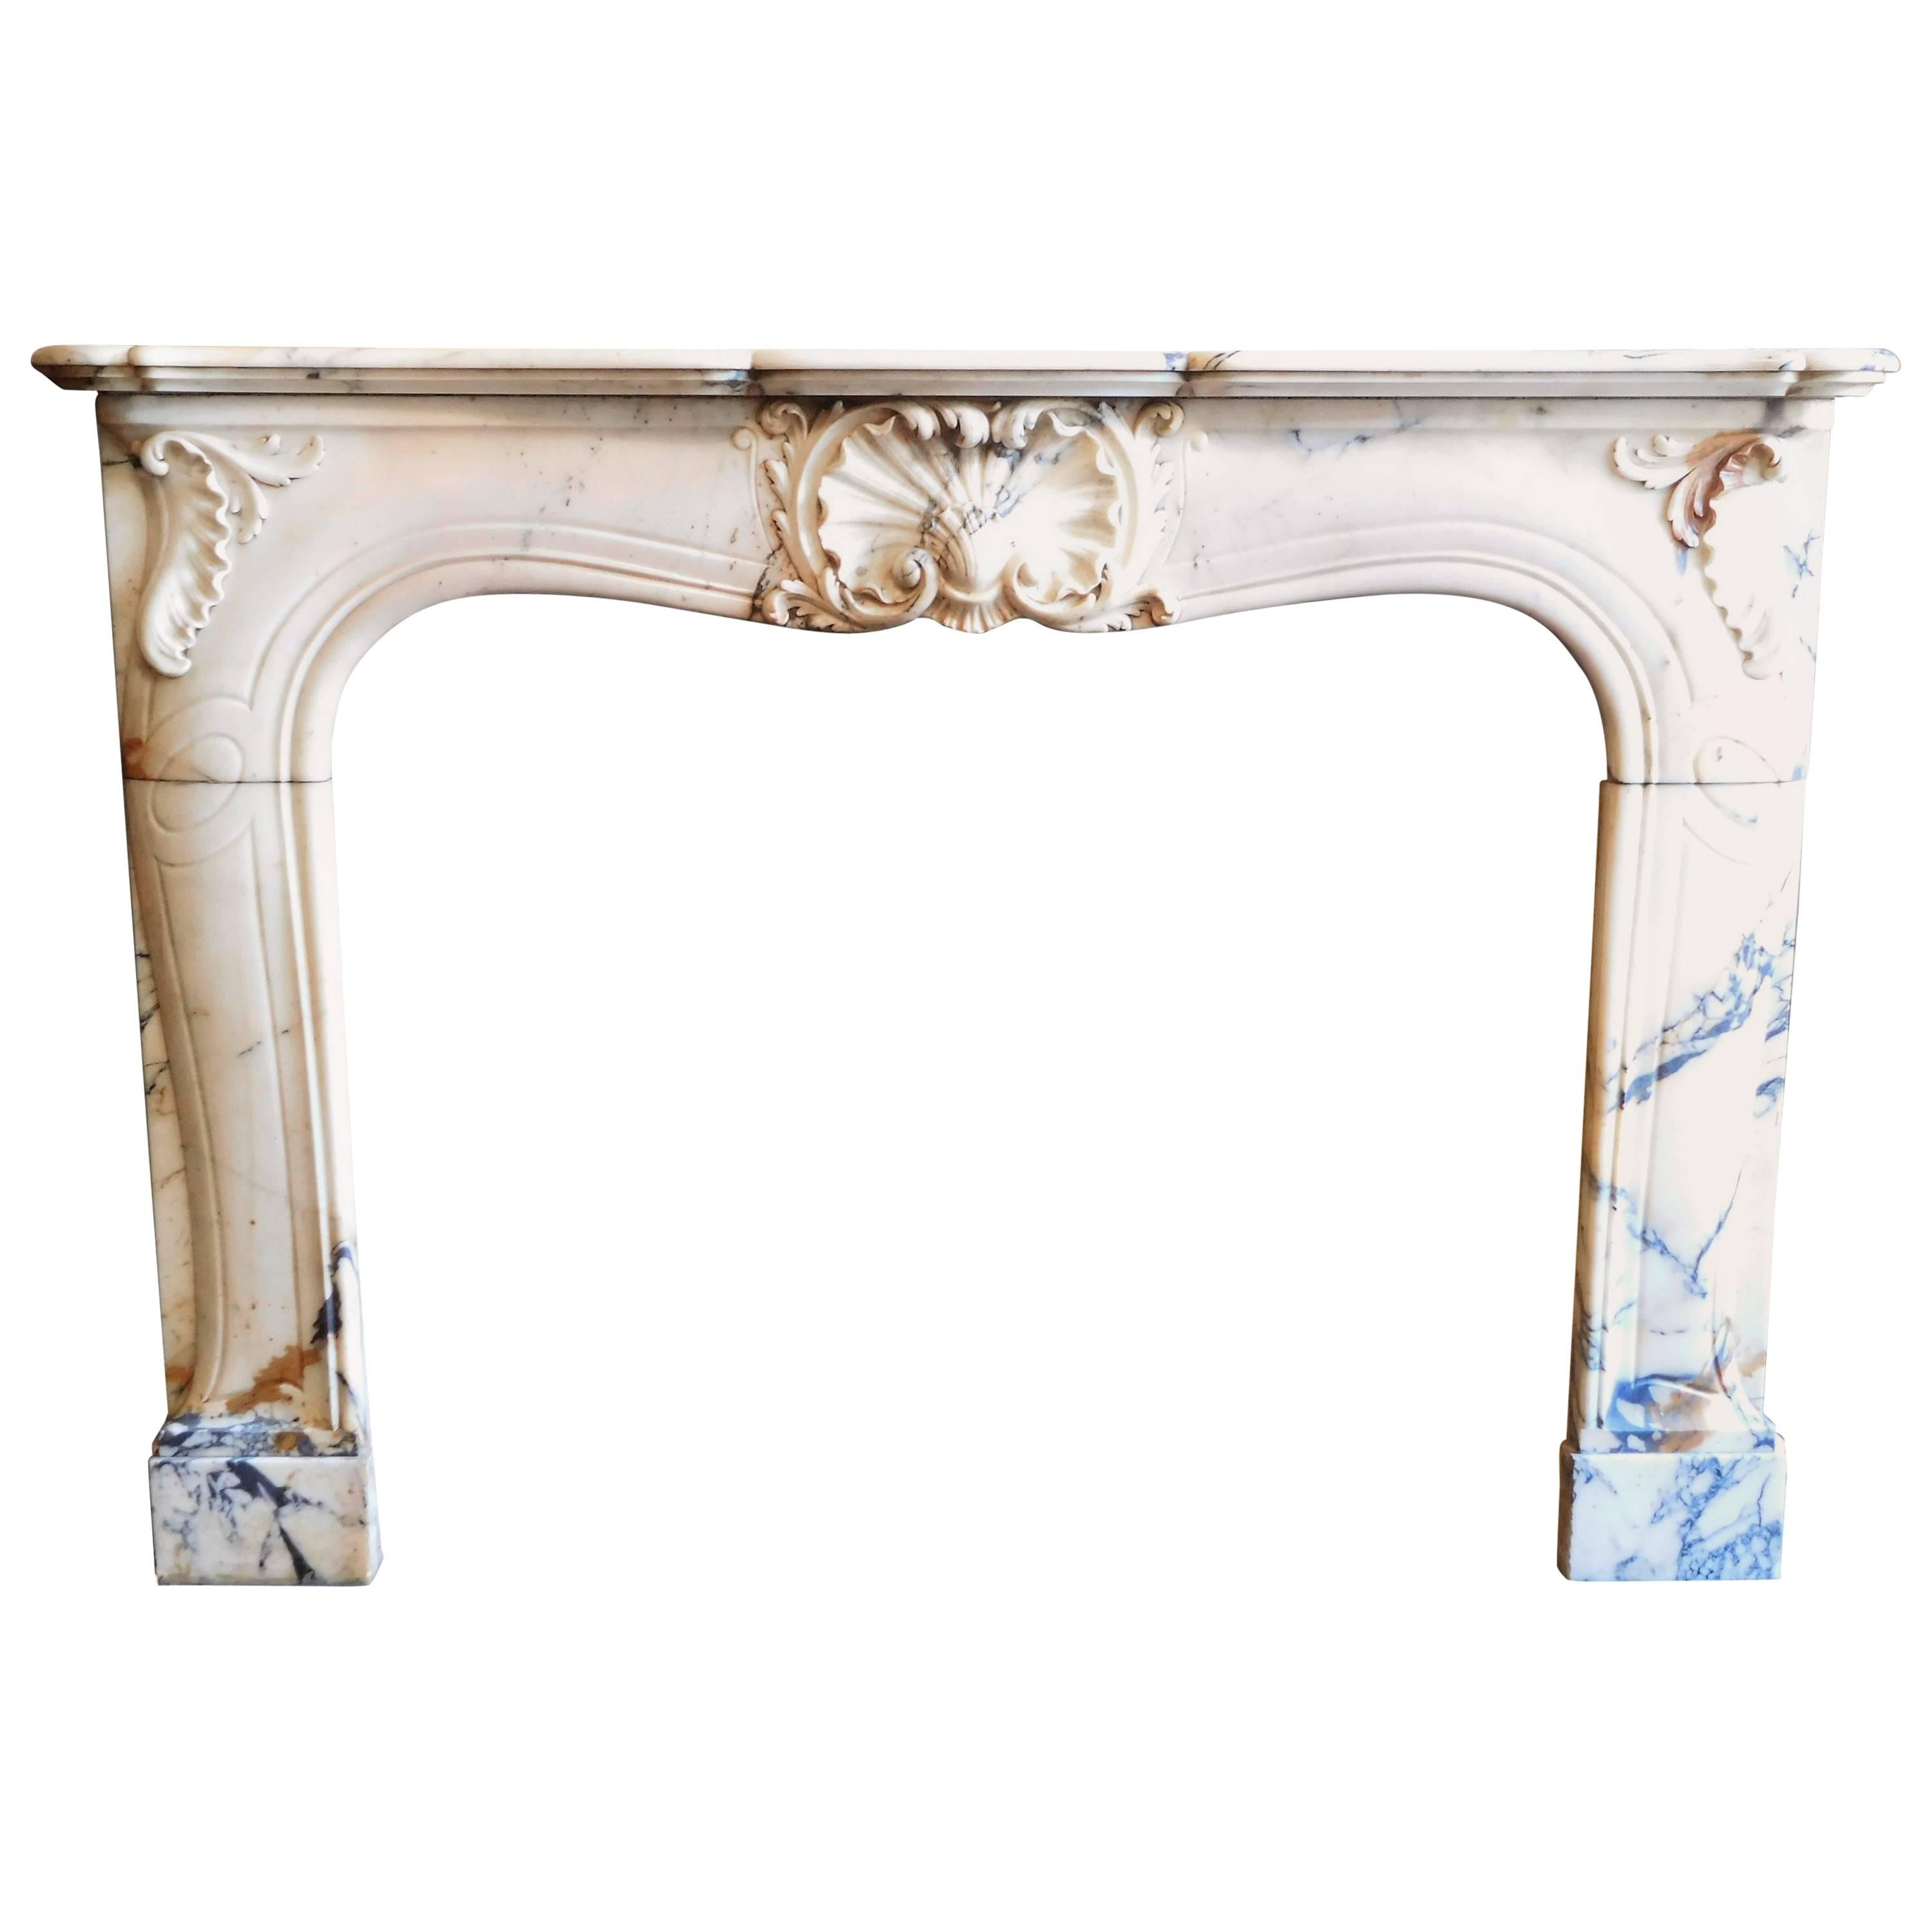 LOUIS XV Style Fireplace In Rococo Manner For Sale